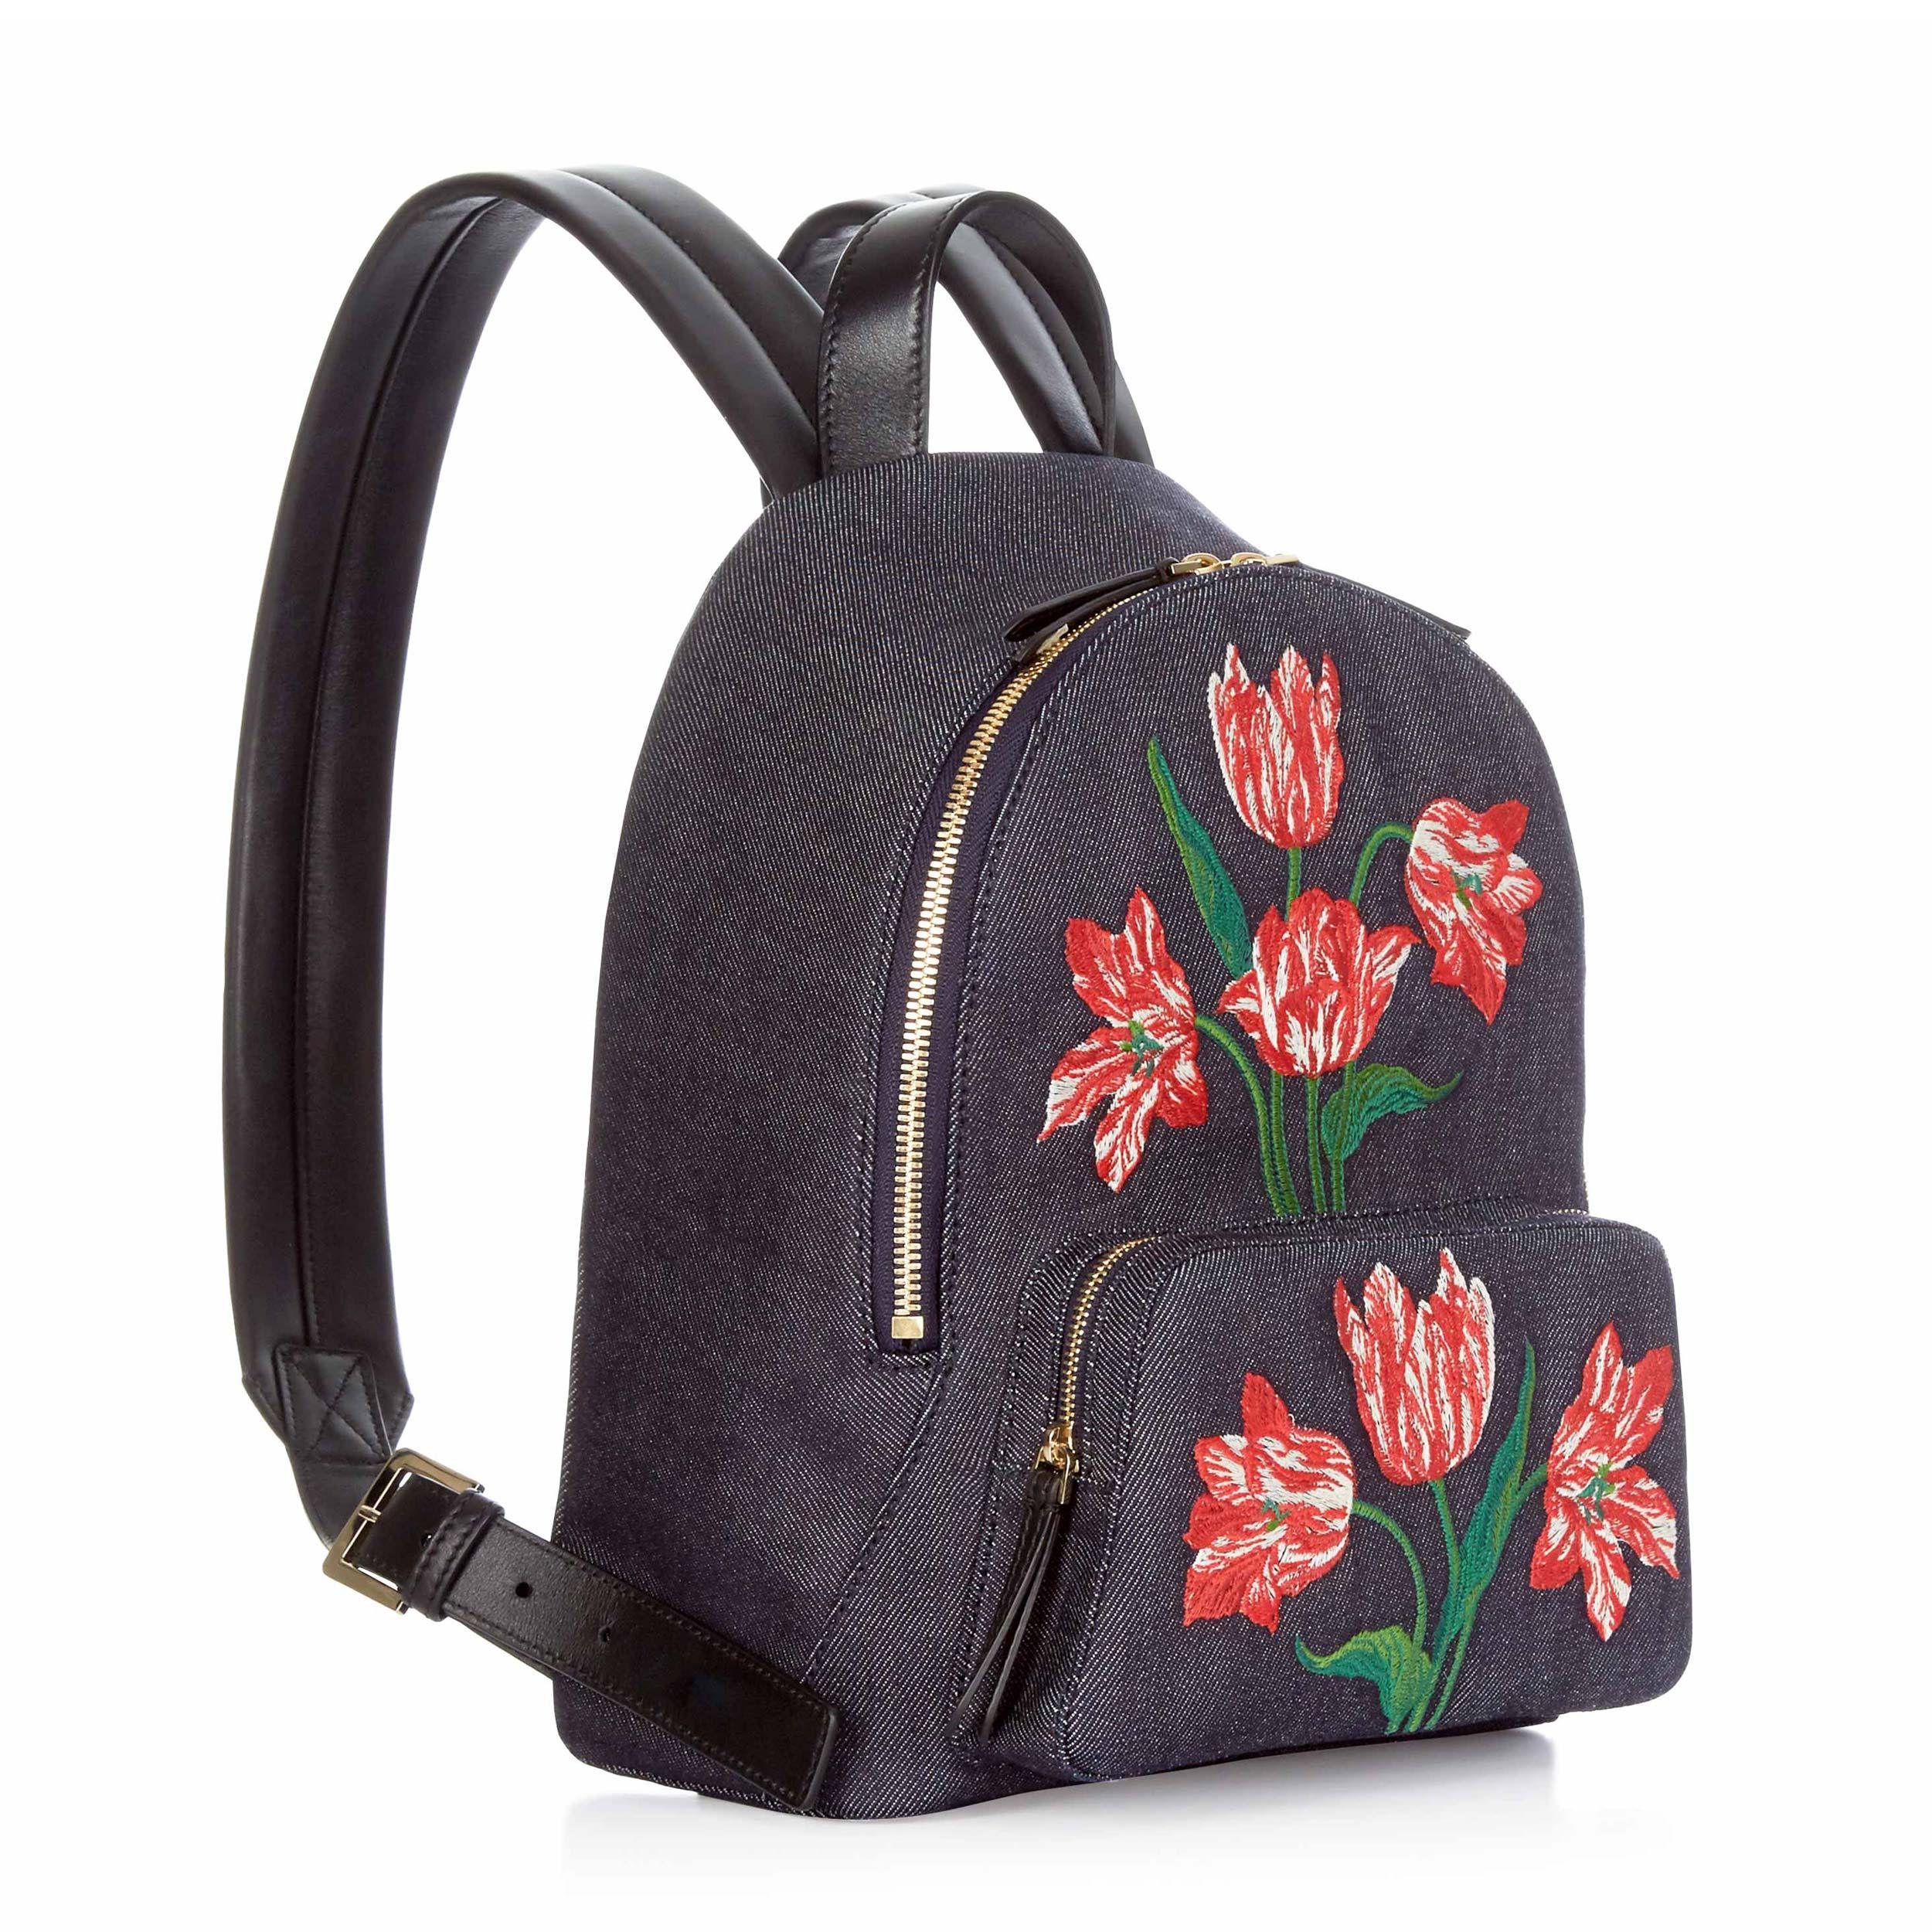 Sustainable Denim Designer Backpack - A blend of London's style and Italian craftsmanship.